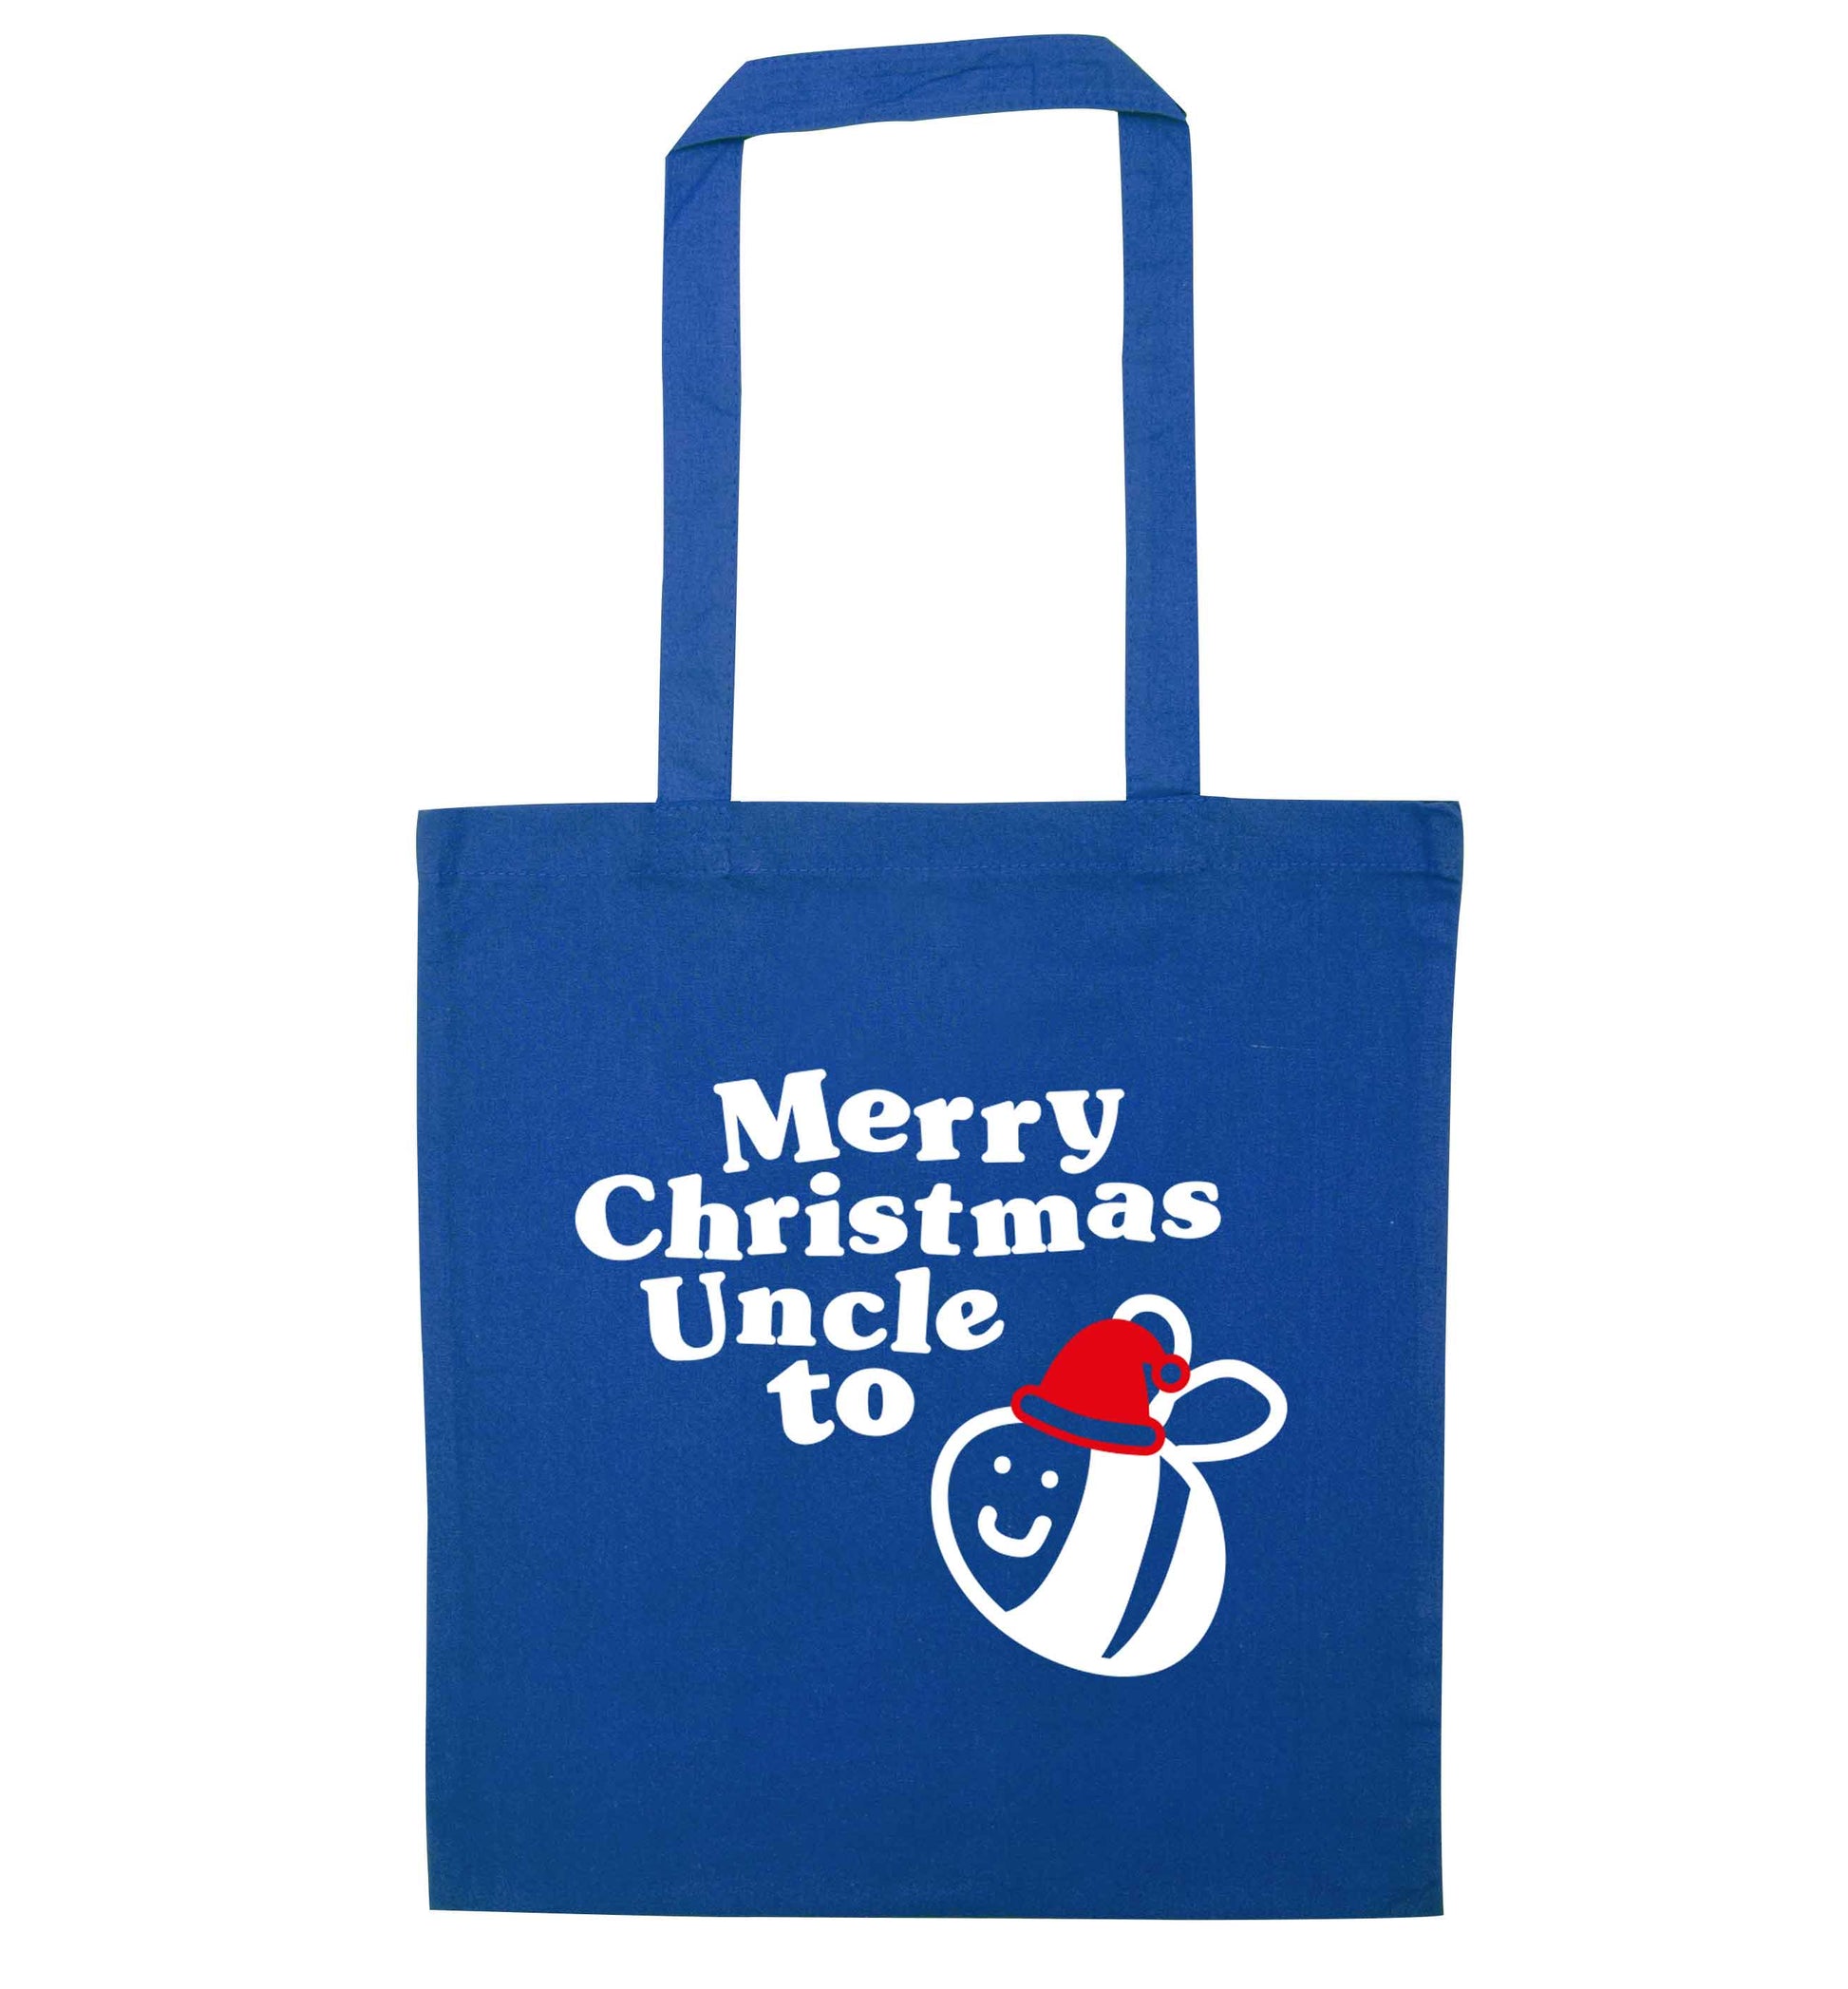 Merry Christmas uncle to be blue tote bag